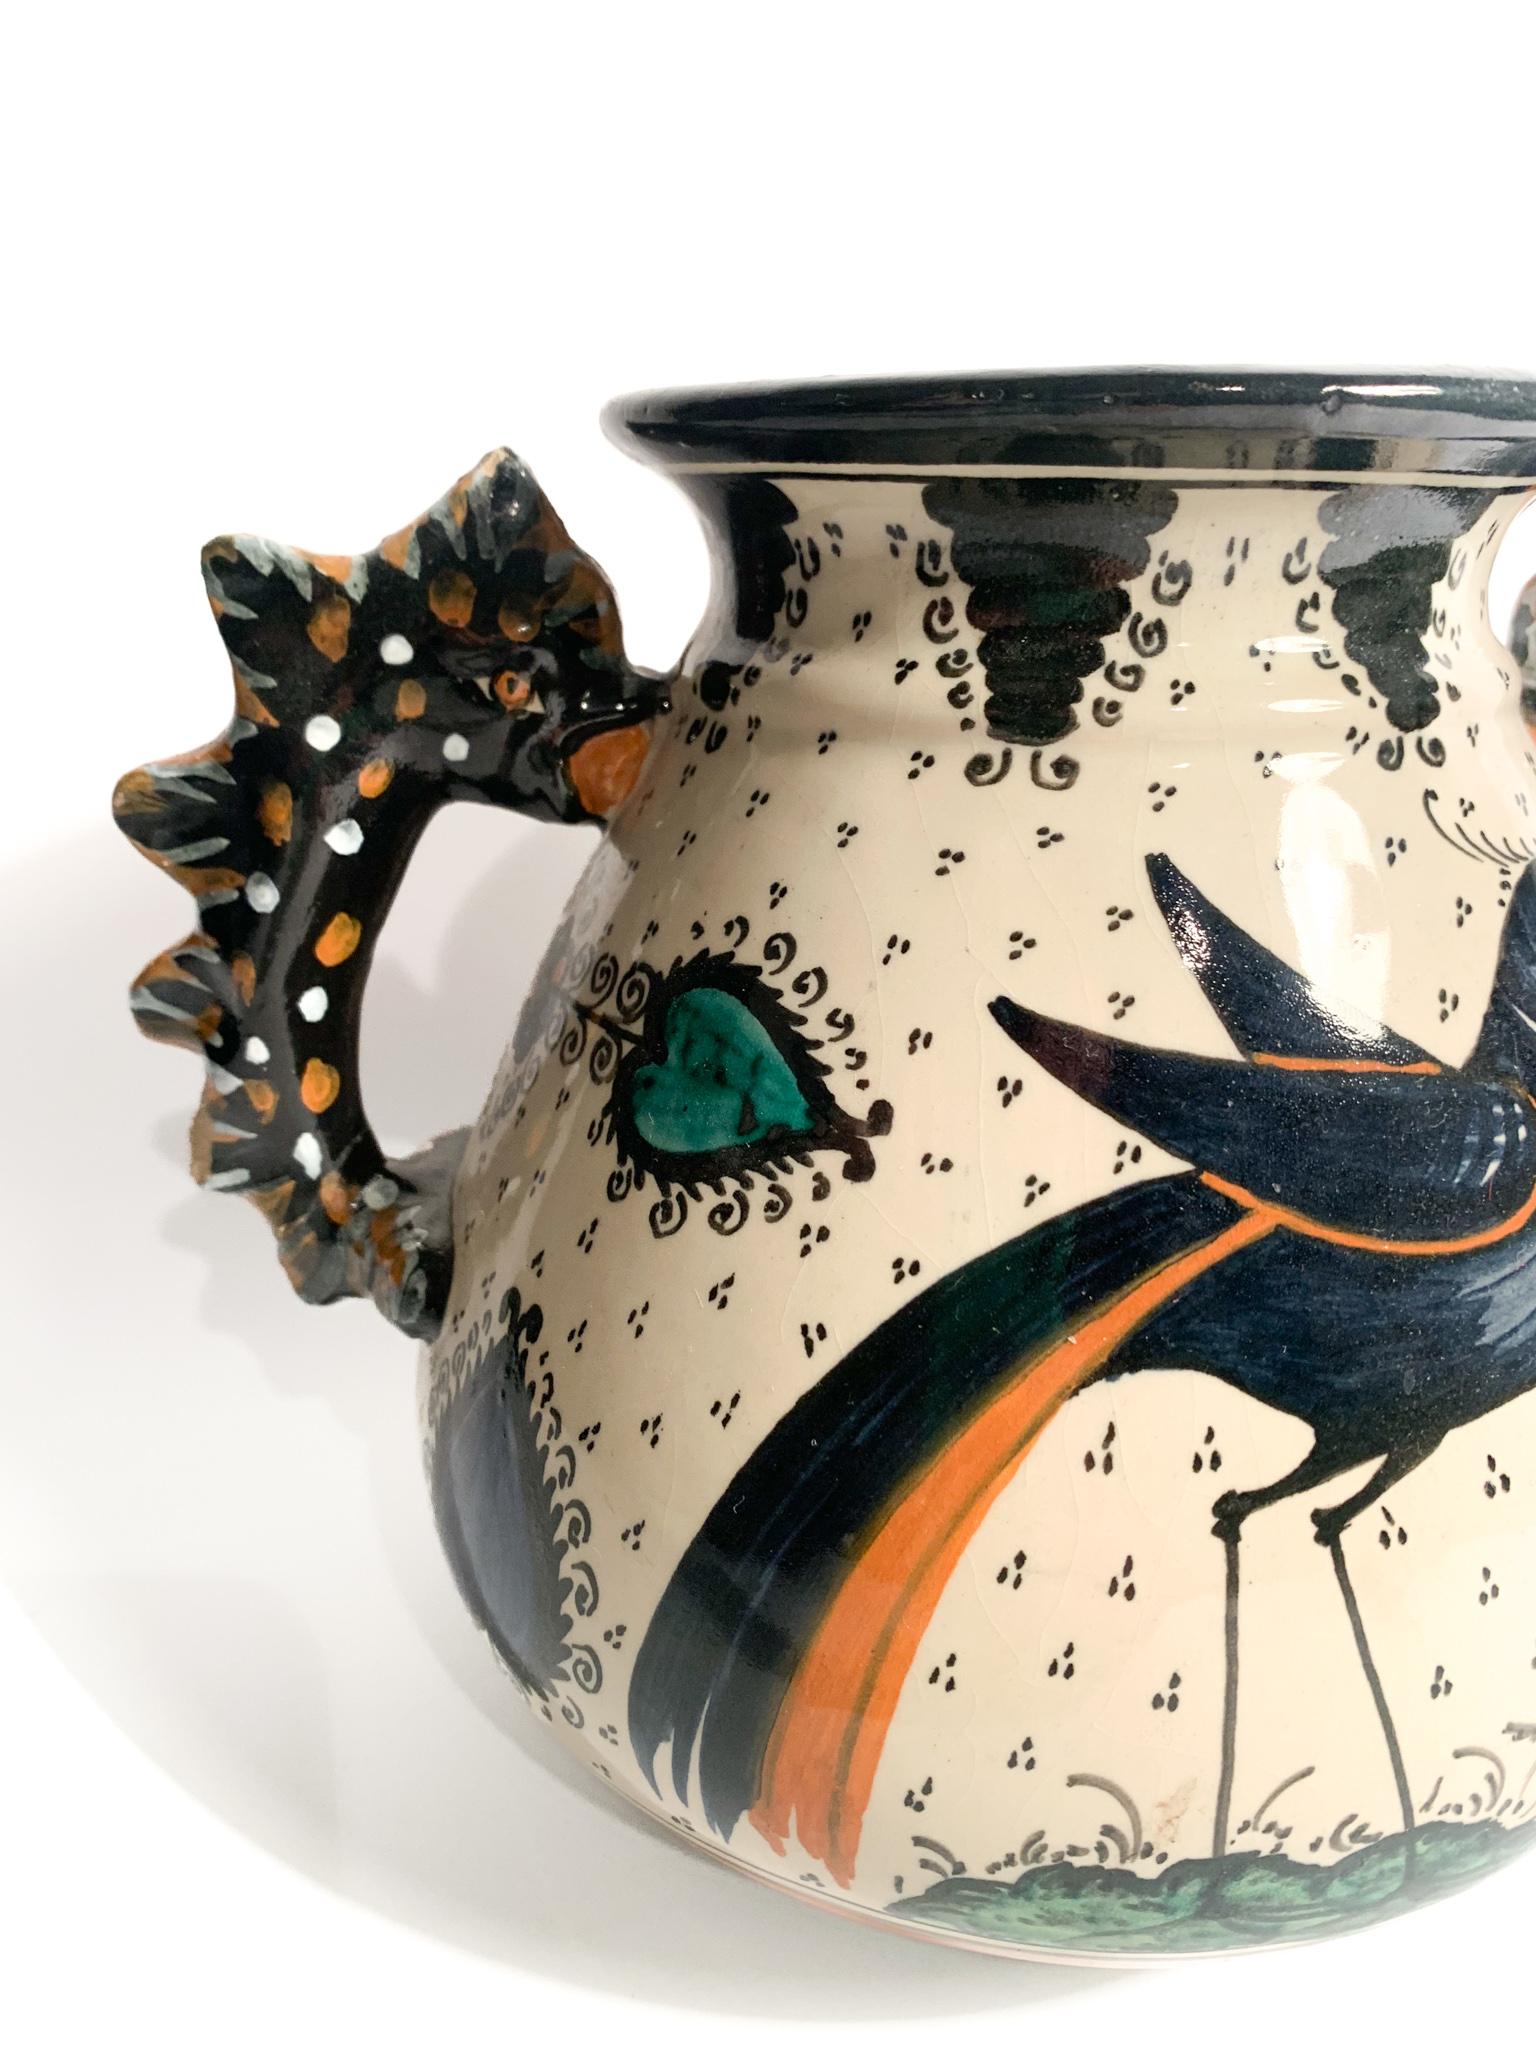 Mid-Century Modern Hand-Painted Ceramic Vase by Molaroni Pesaro from the 1950s